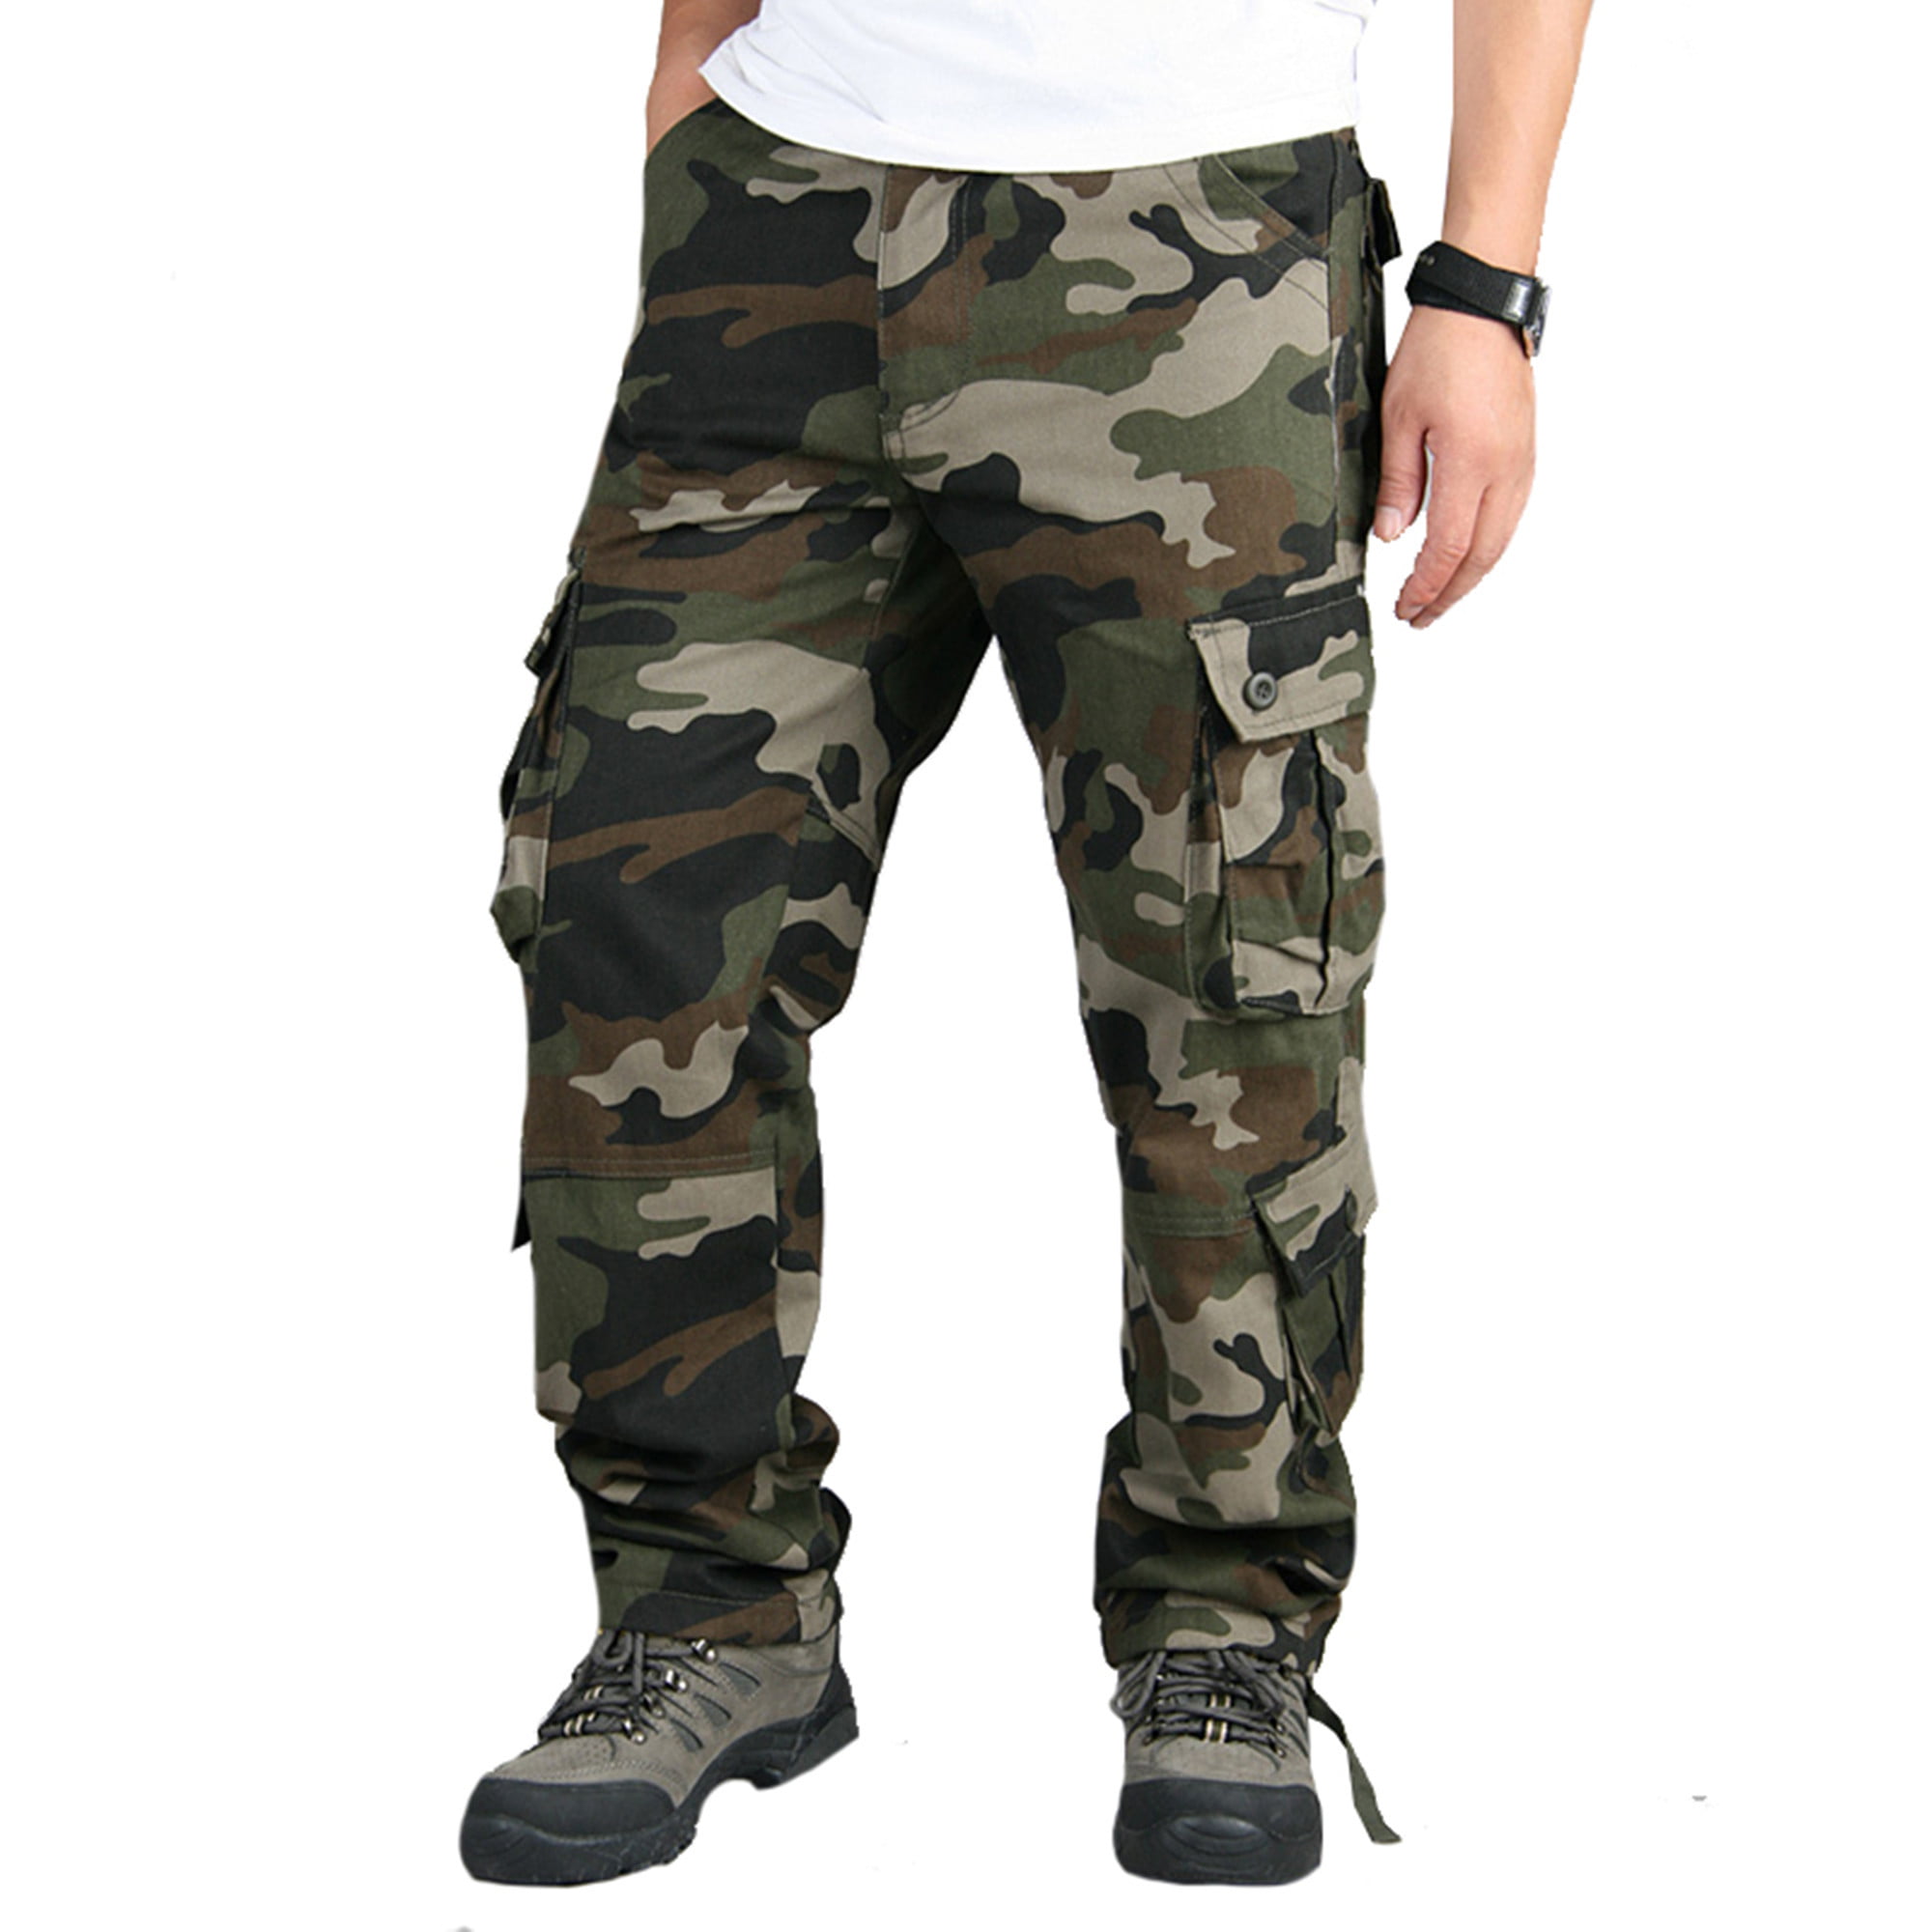 Mens Cargo Combat Work Trousers Army Military Camo Camouflage-Plain Multipocket 